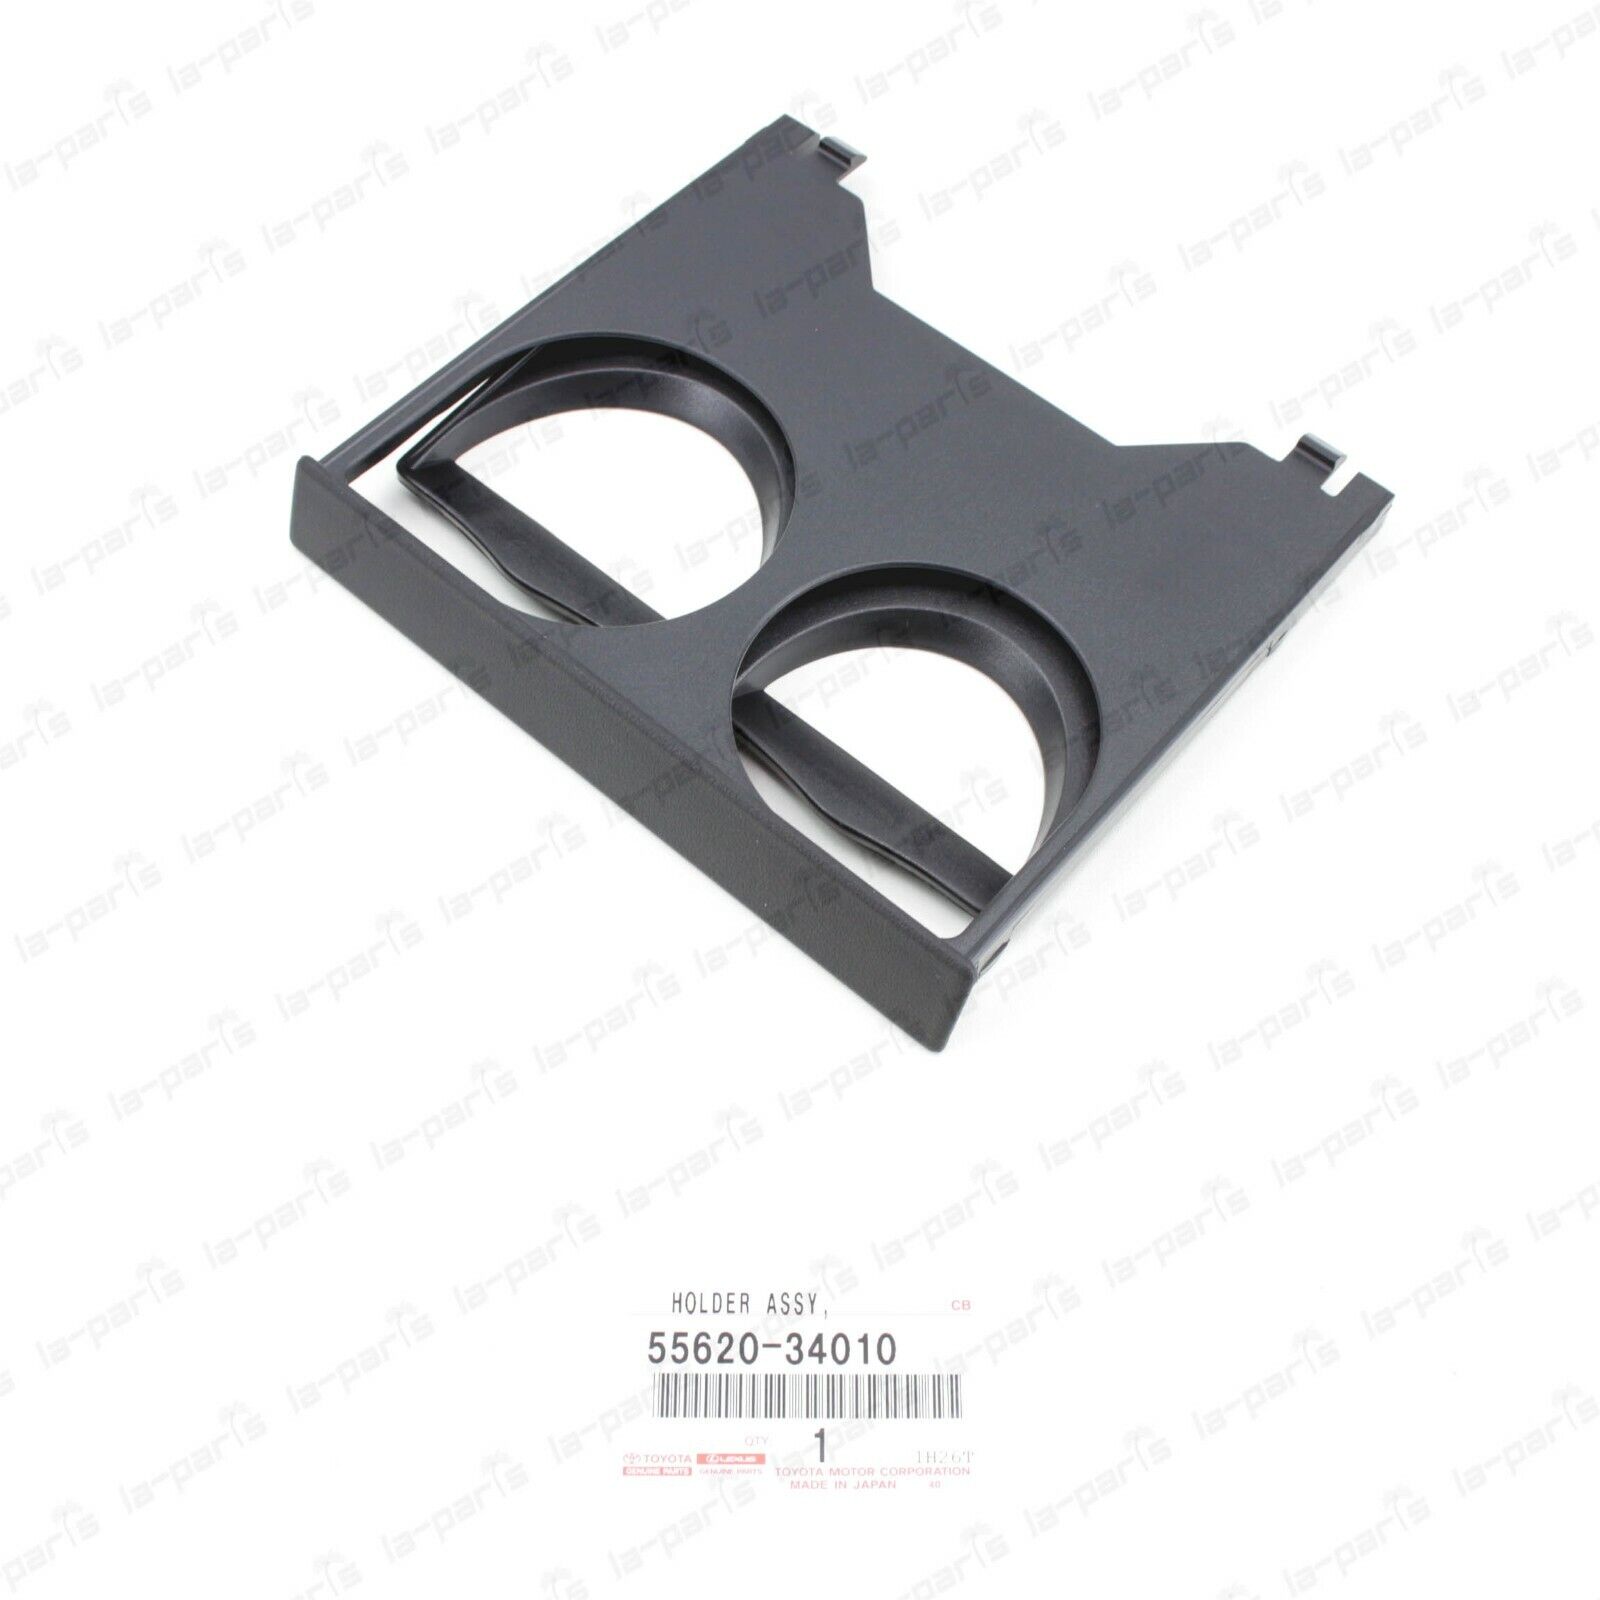 New Genuine For Toyota T100 1993-1998 Cup Holder Assembly 55620-34010